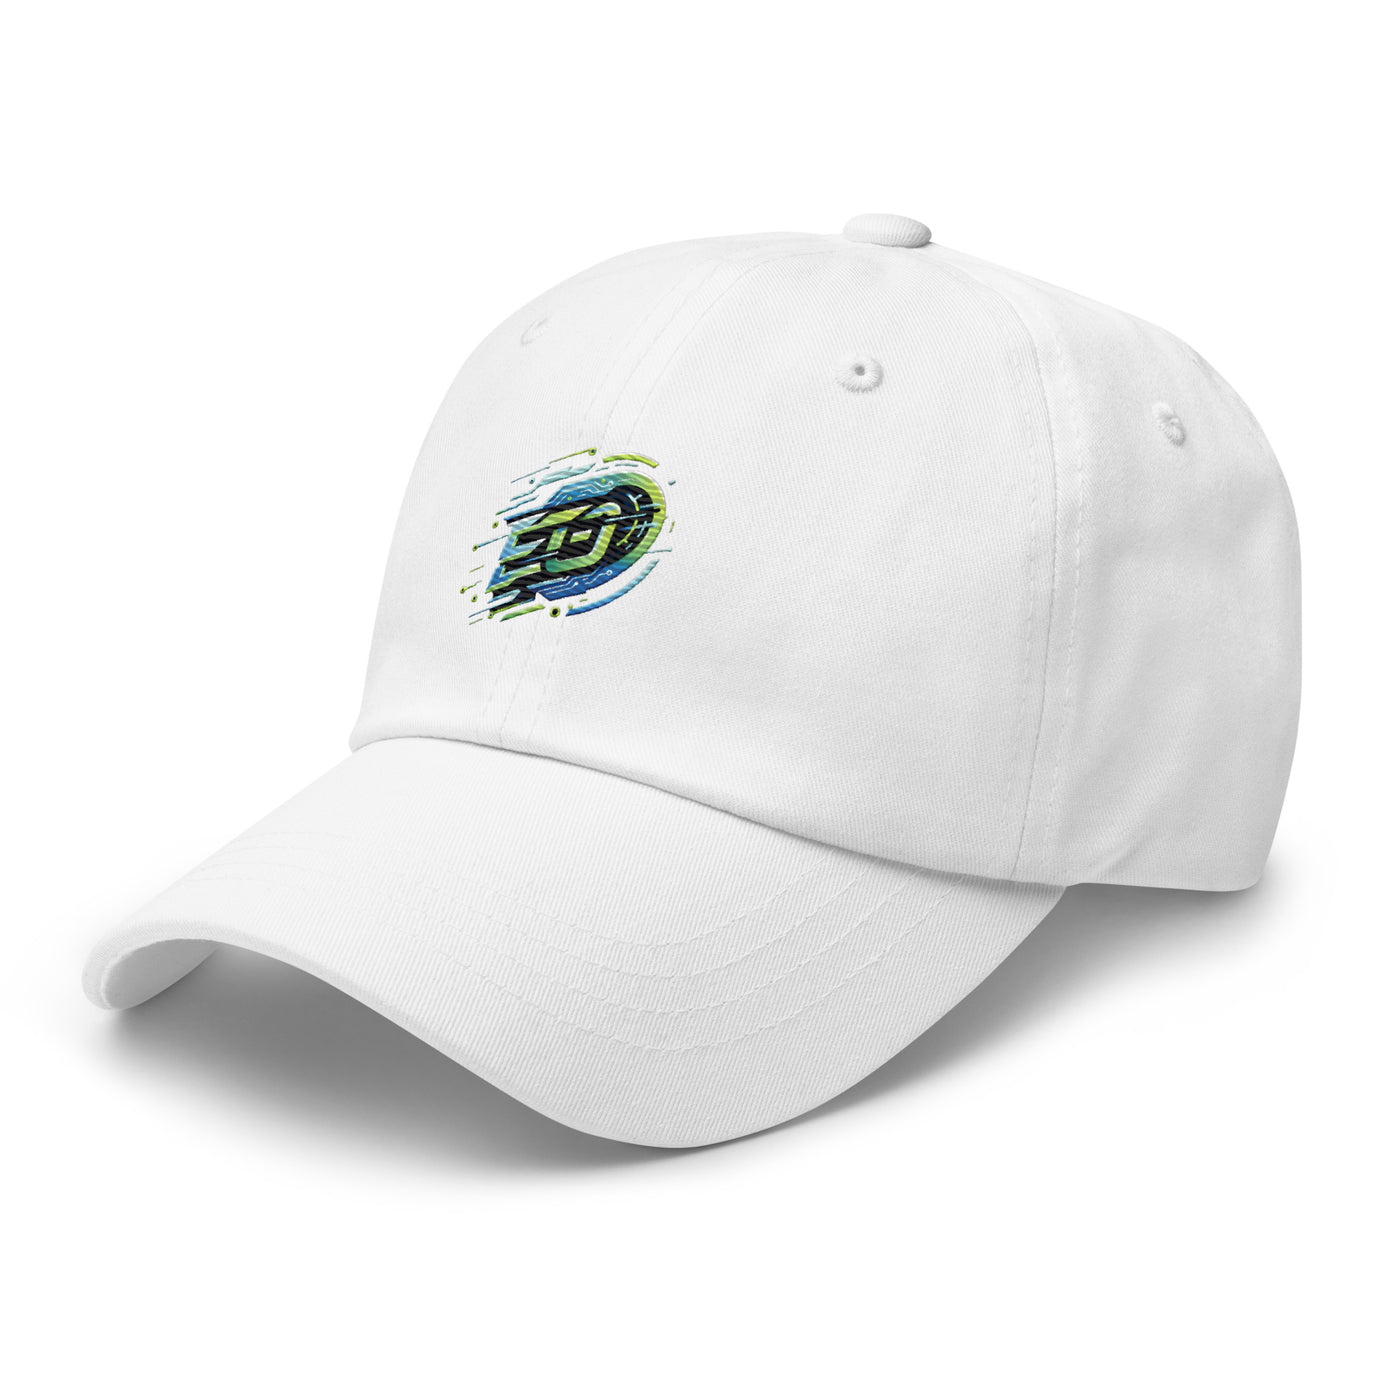 Project EO Esports Dad hat